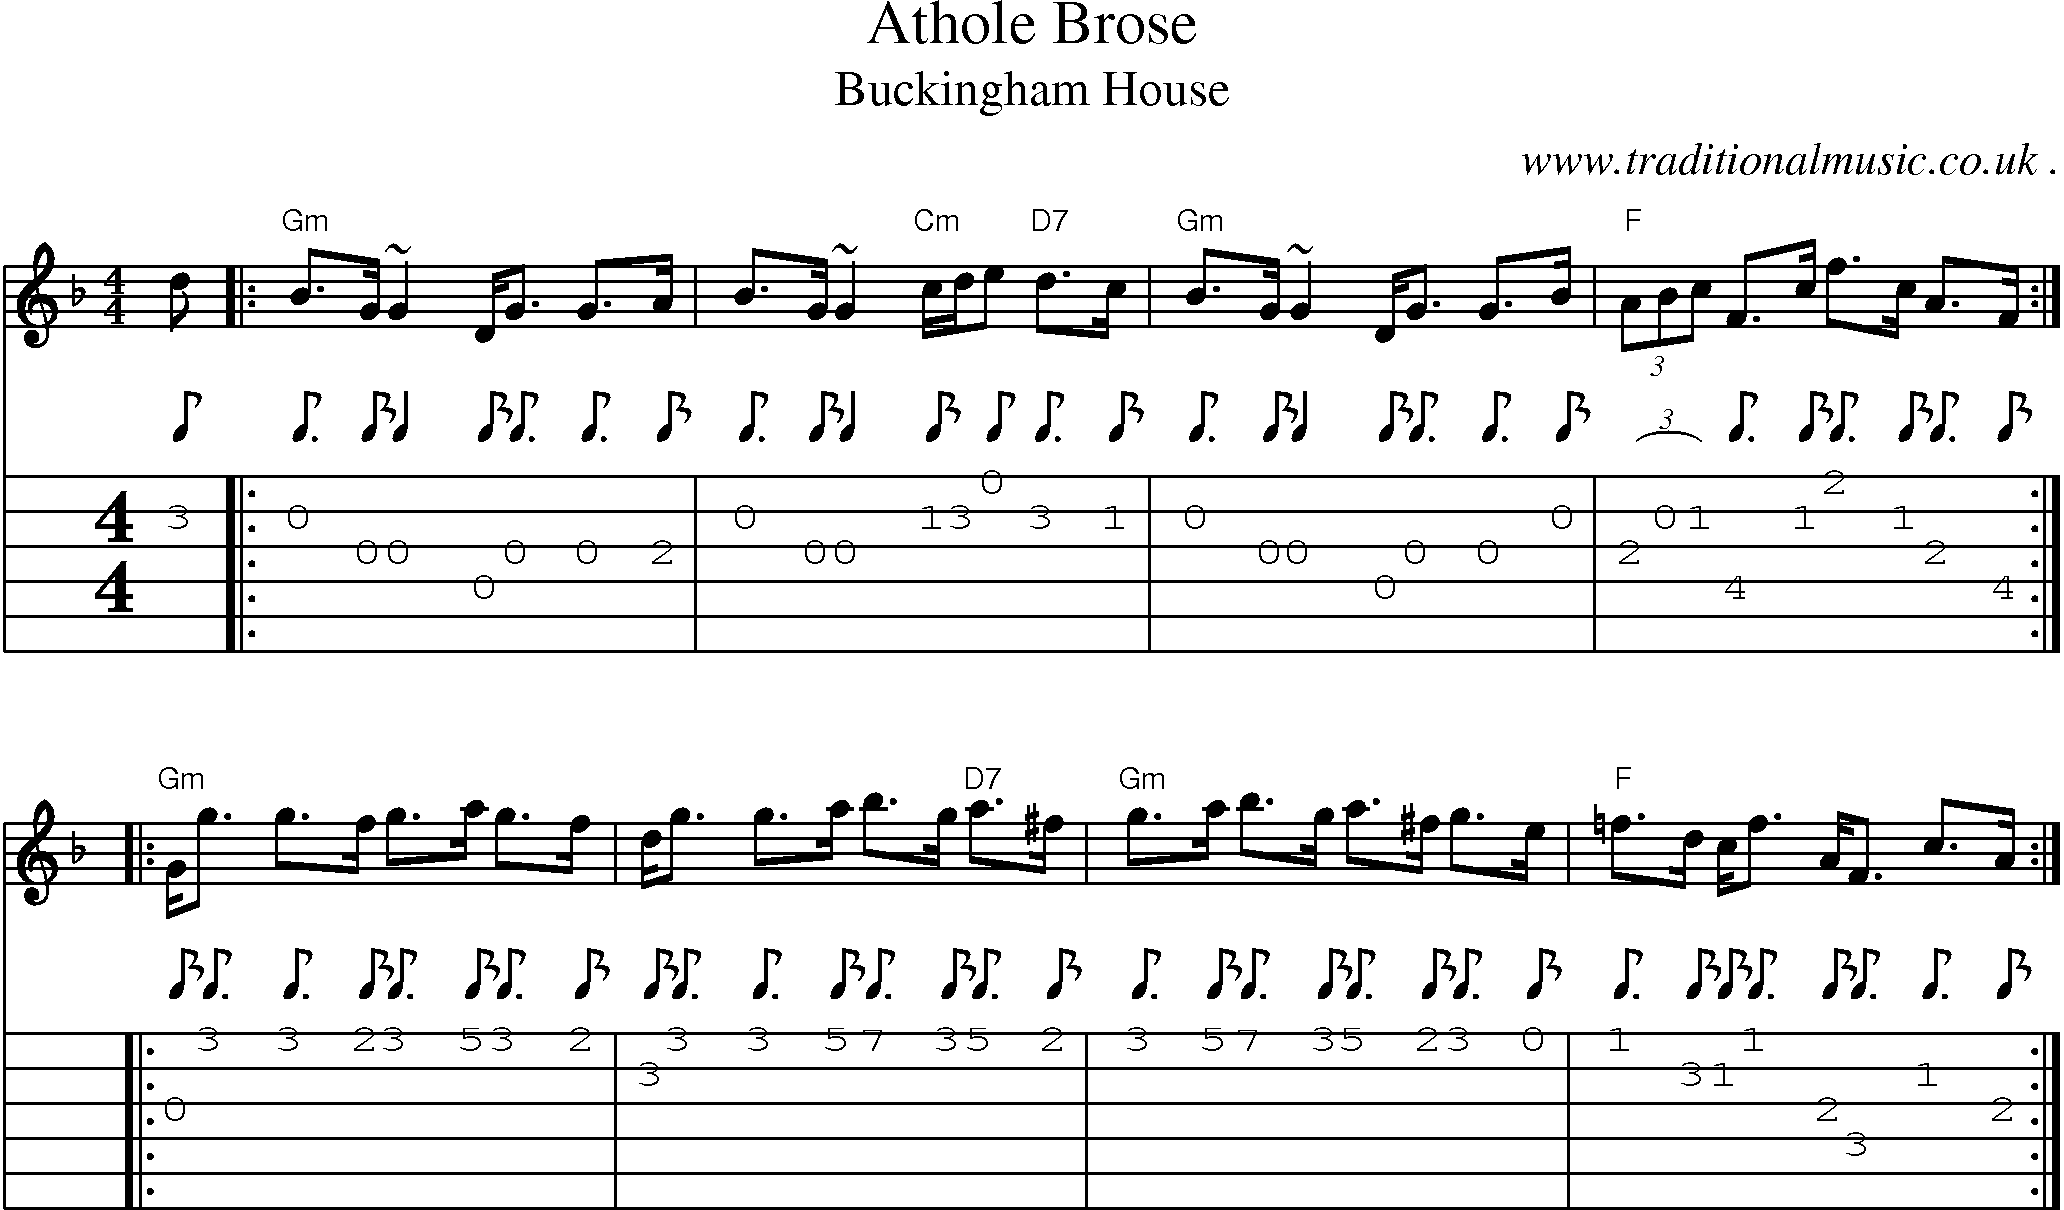 Sheet-music  score, Chords and Guitar Tabs for Athole Brose